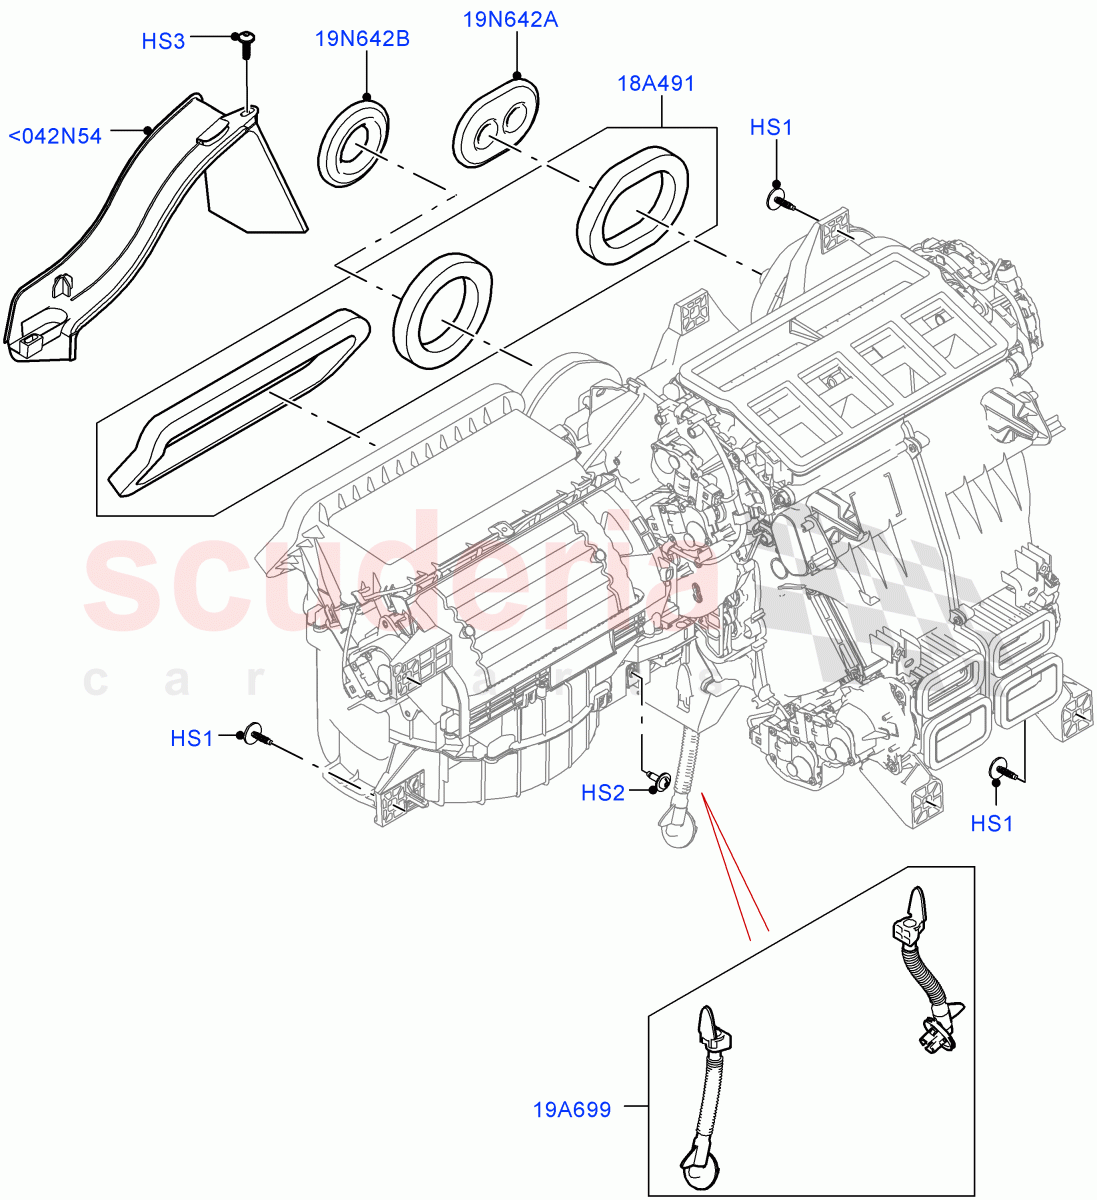 Heater/Air Cond.External Components(Main Unit, Nitra Plant Build) of Land Rover Land Rover Defender (2020+) [2.0 Turbo Diesel]